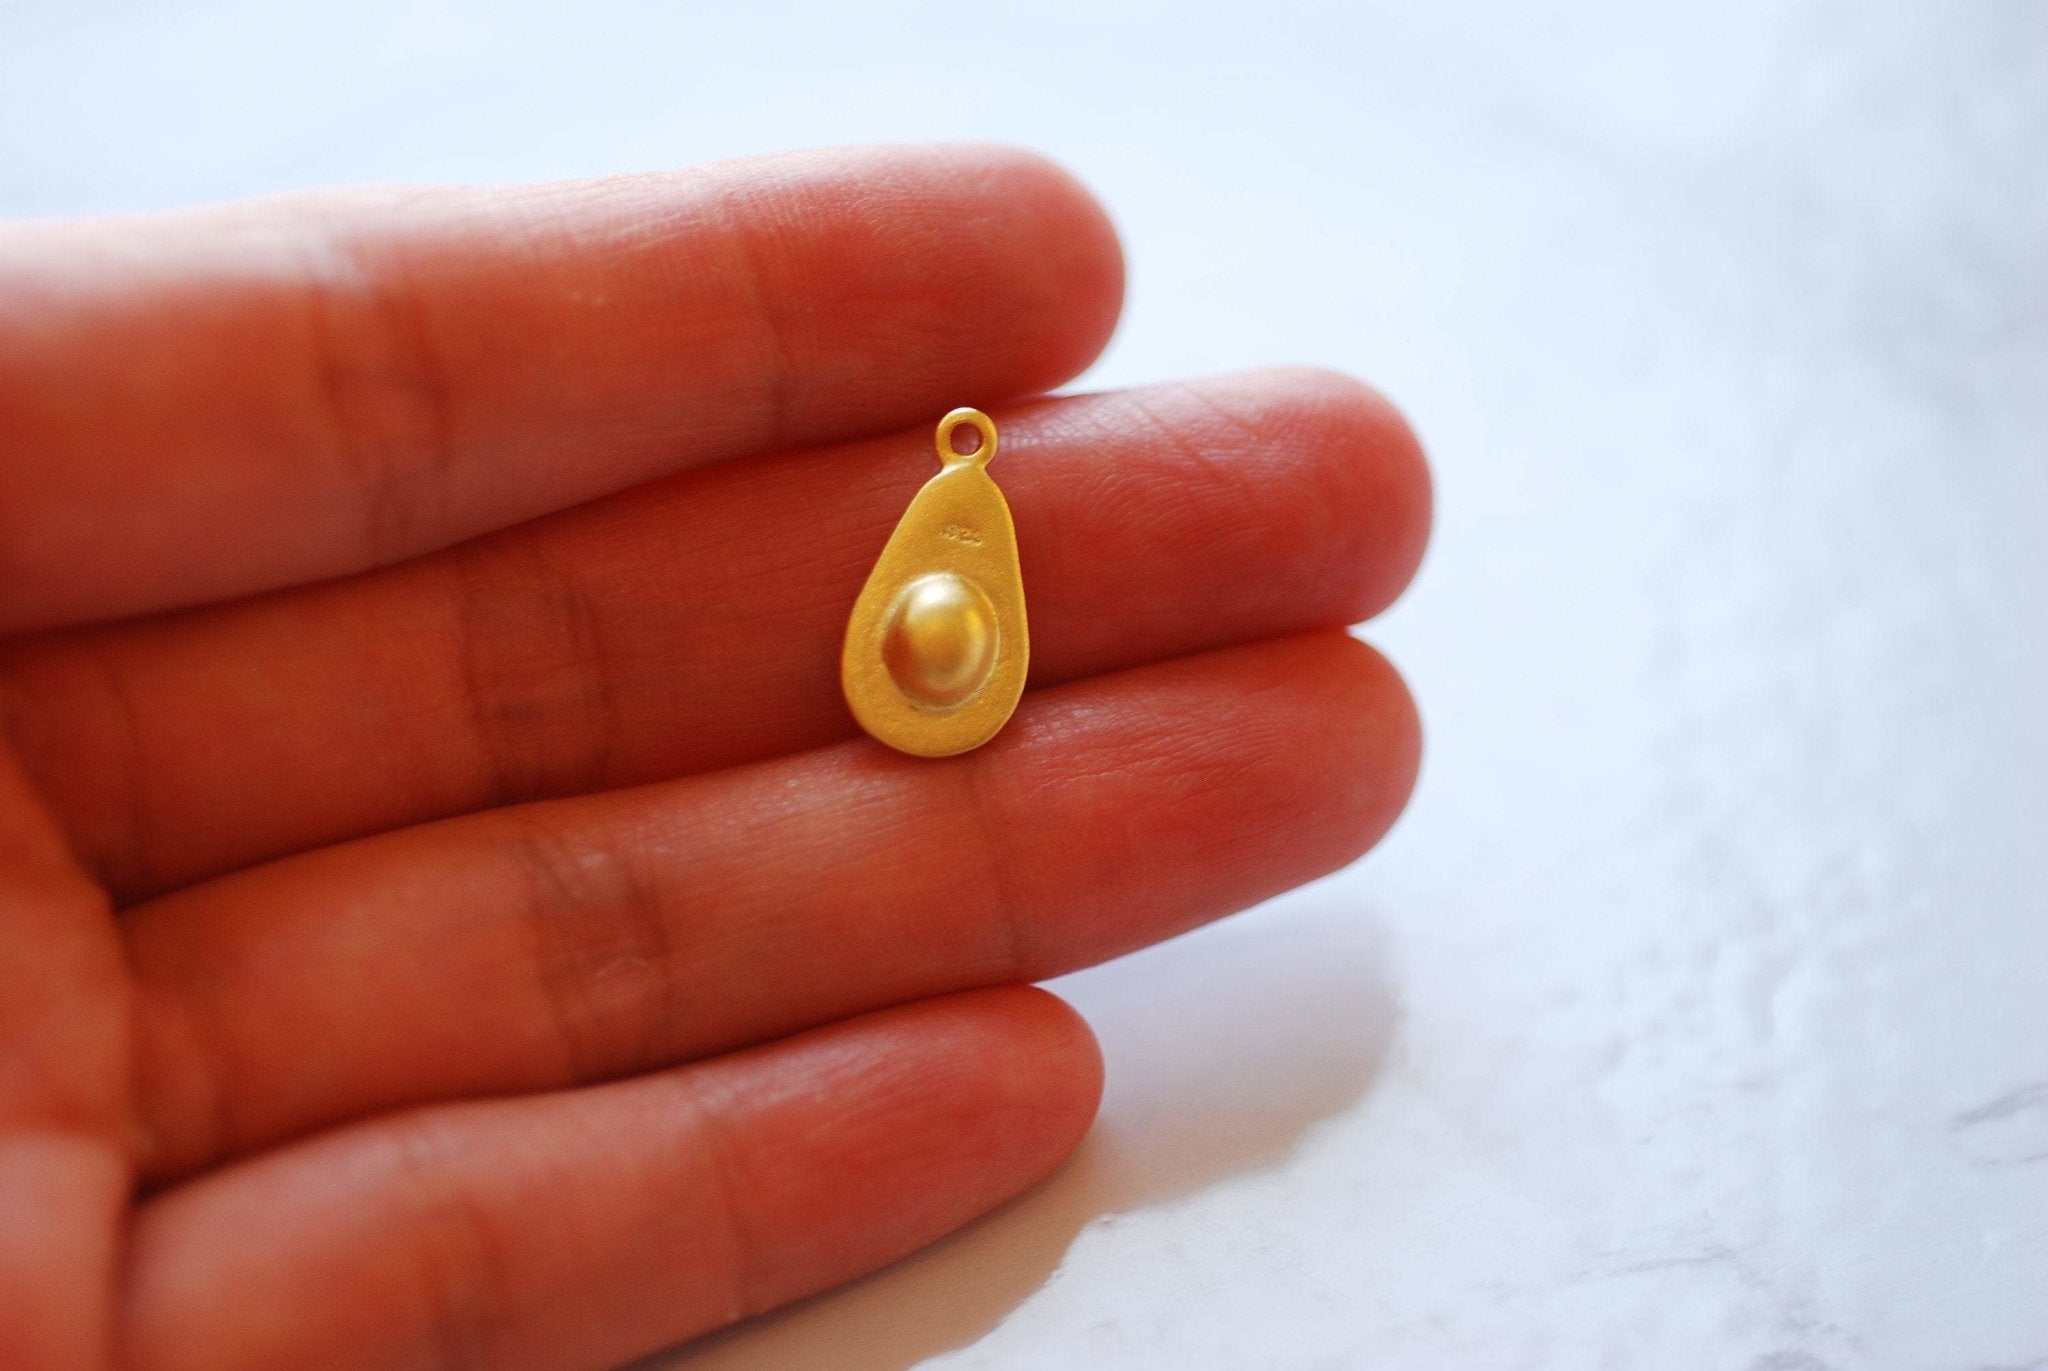 Avocado Fruit Charm- 18k gold plated over 925 Sterling Silver, Half Avocado Charm Pendant, Avocado Pit, Fruit Vegetable Charm, Foodie, 496 - HarperCrown